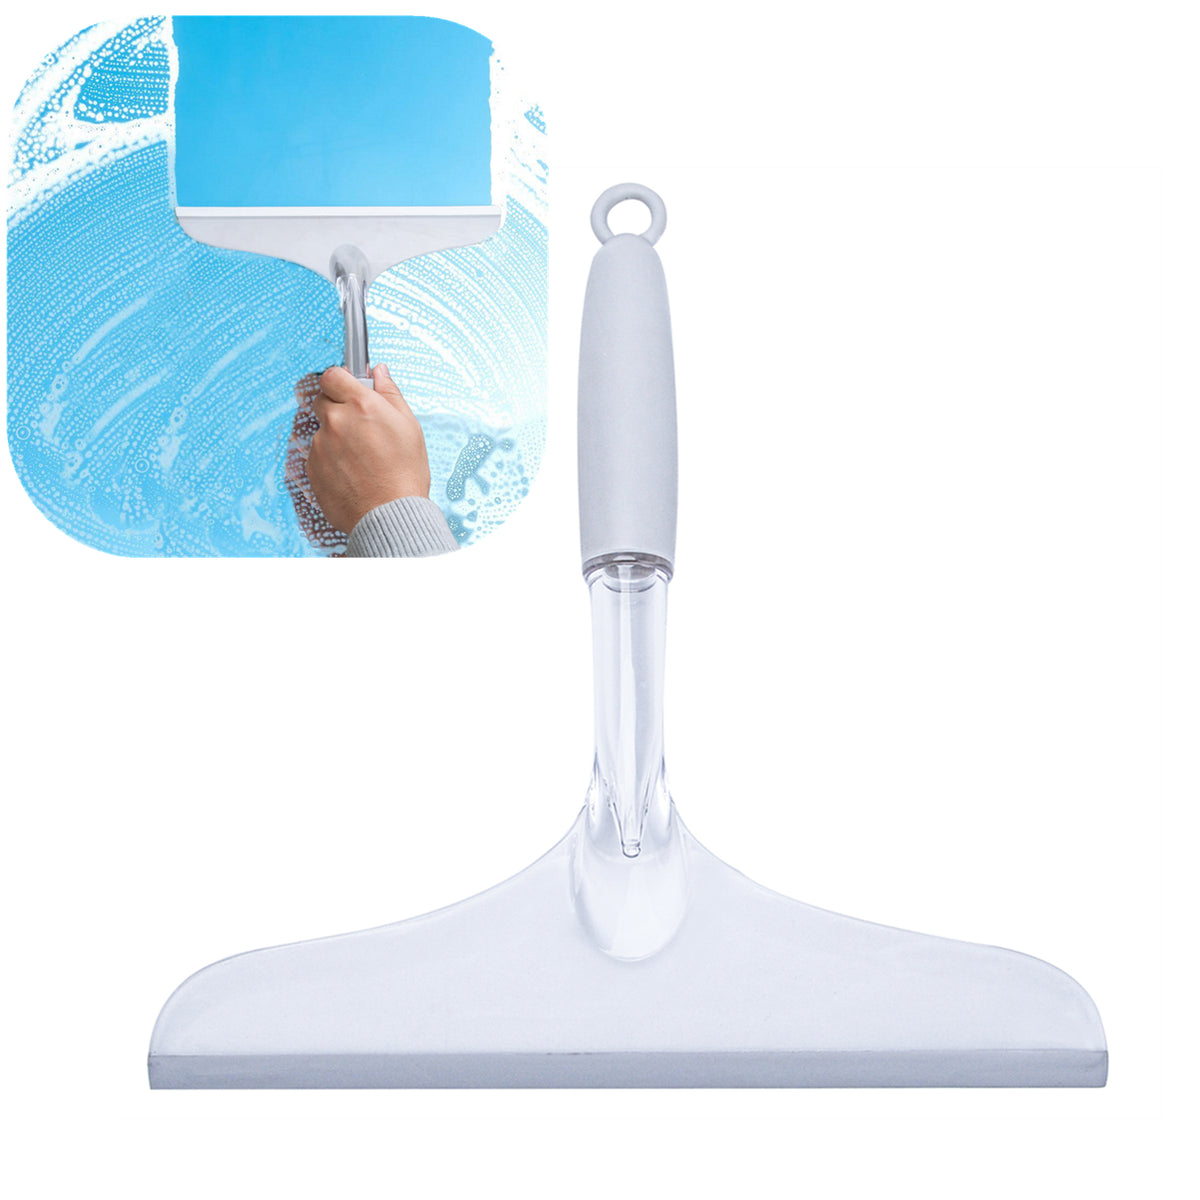 Squeegees Shower, 2PCS/1PCS Streak-Free Handheld Squeegee Cleaner with  10Rubber Window Cleaning Squeegee Wiper Cleaning Tool for Washing Shower  Door, Bathroom, Kitchen, Glass, Car 